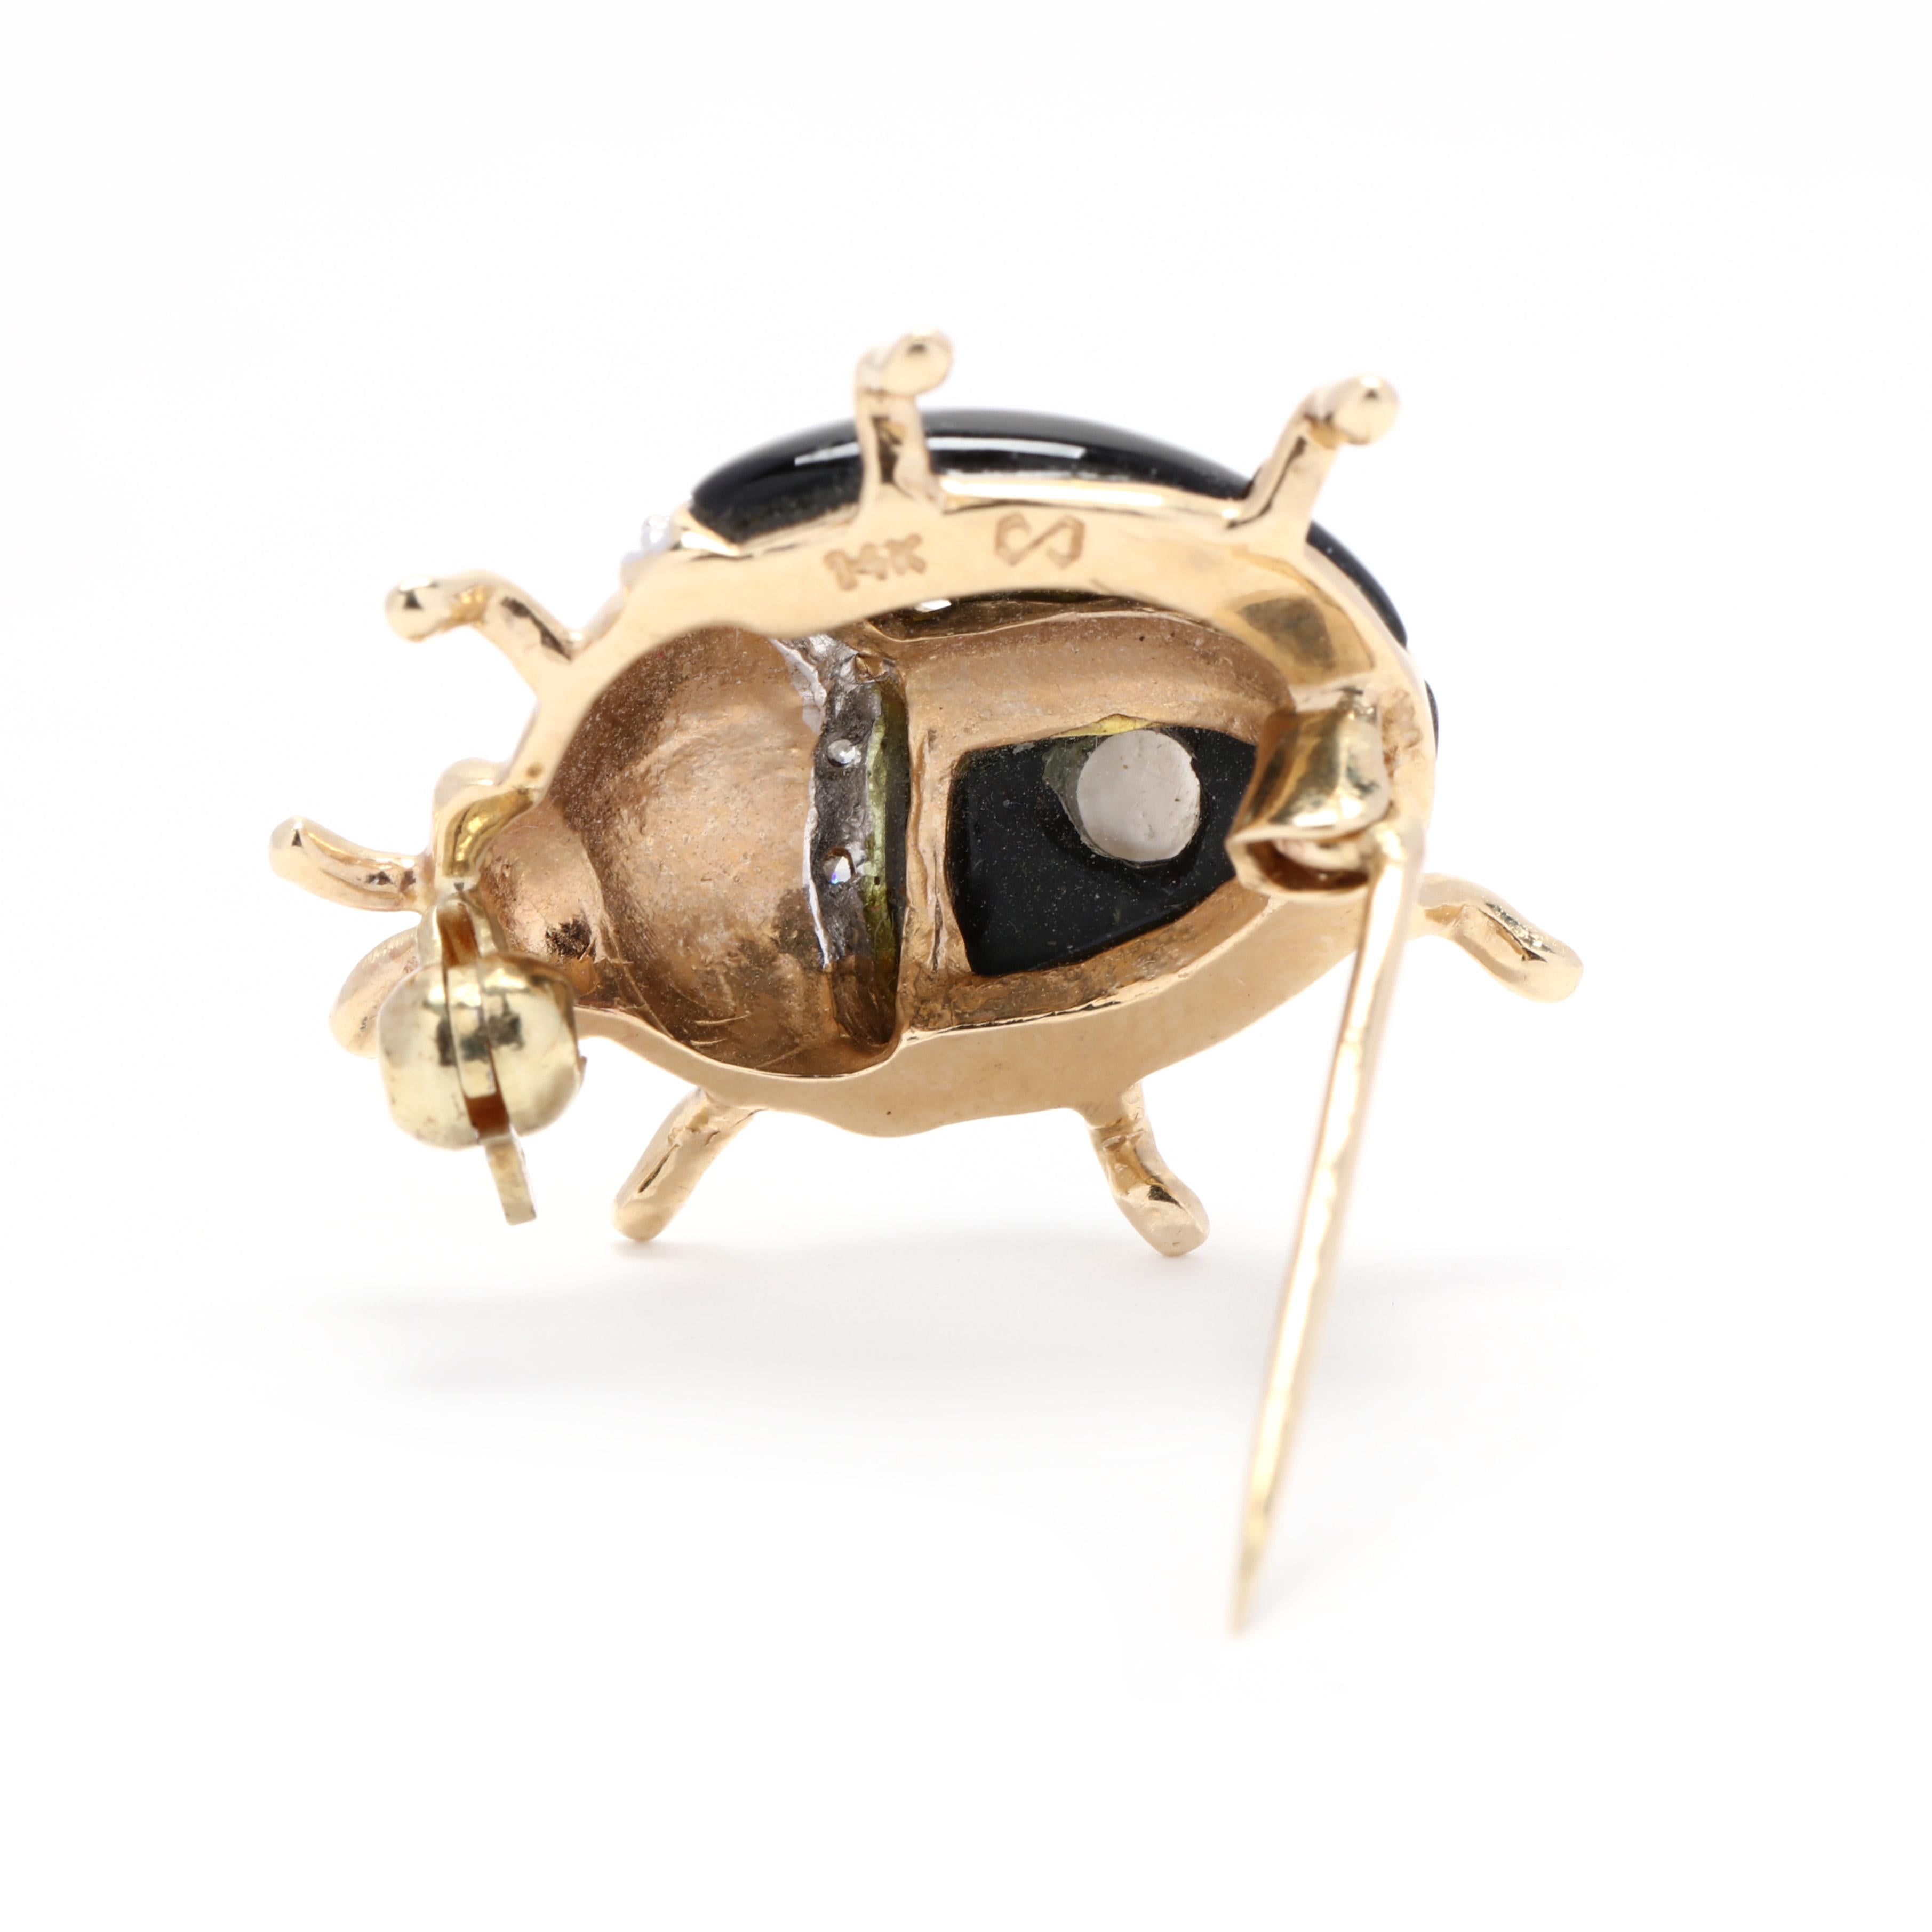 A vintage 14 karat yellow gold mother of pearl, black onyx and diamond ladybug brooch. This brooch features a lady bug motif with a spotted black onyx and mother of pearl inlay body and with diamond accents.



Stones:

- black onyx

- mother of